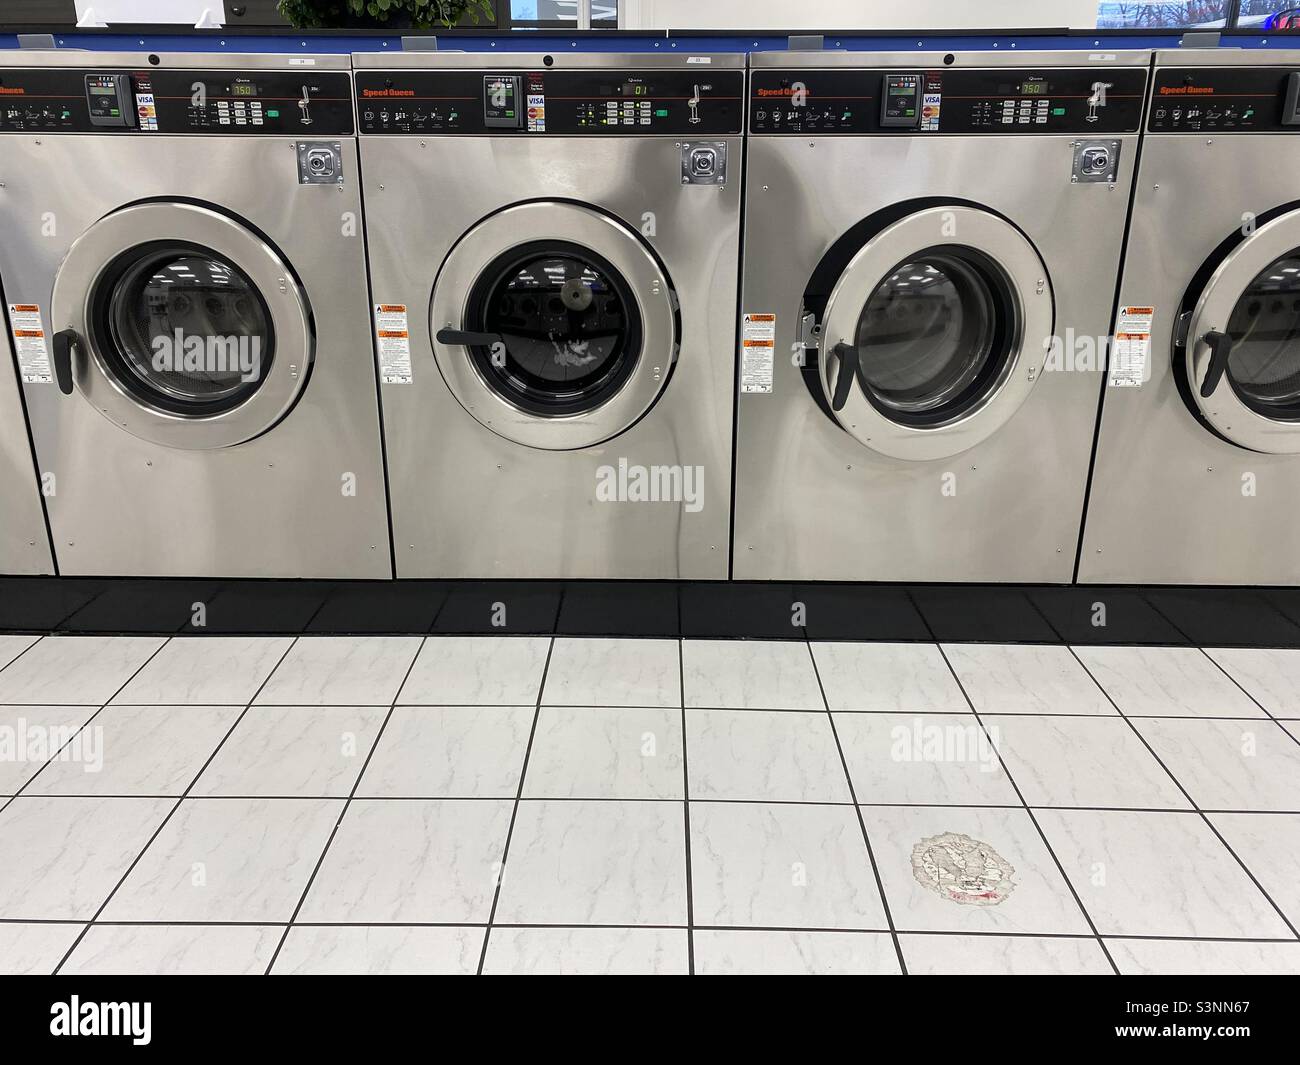 Stainless steel washing machines sit idle in an empty laundromat. Stock Photo